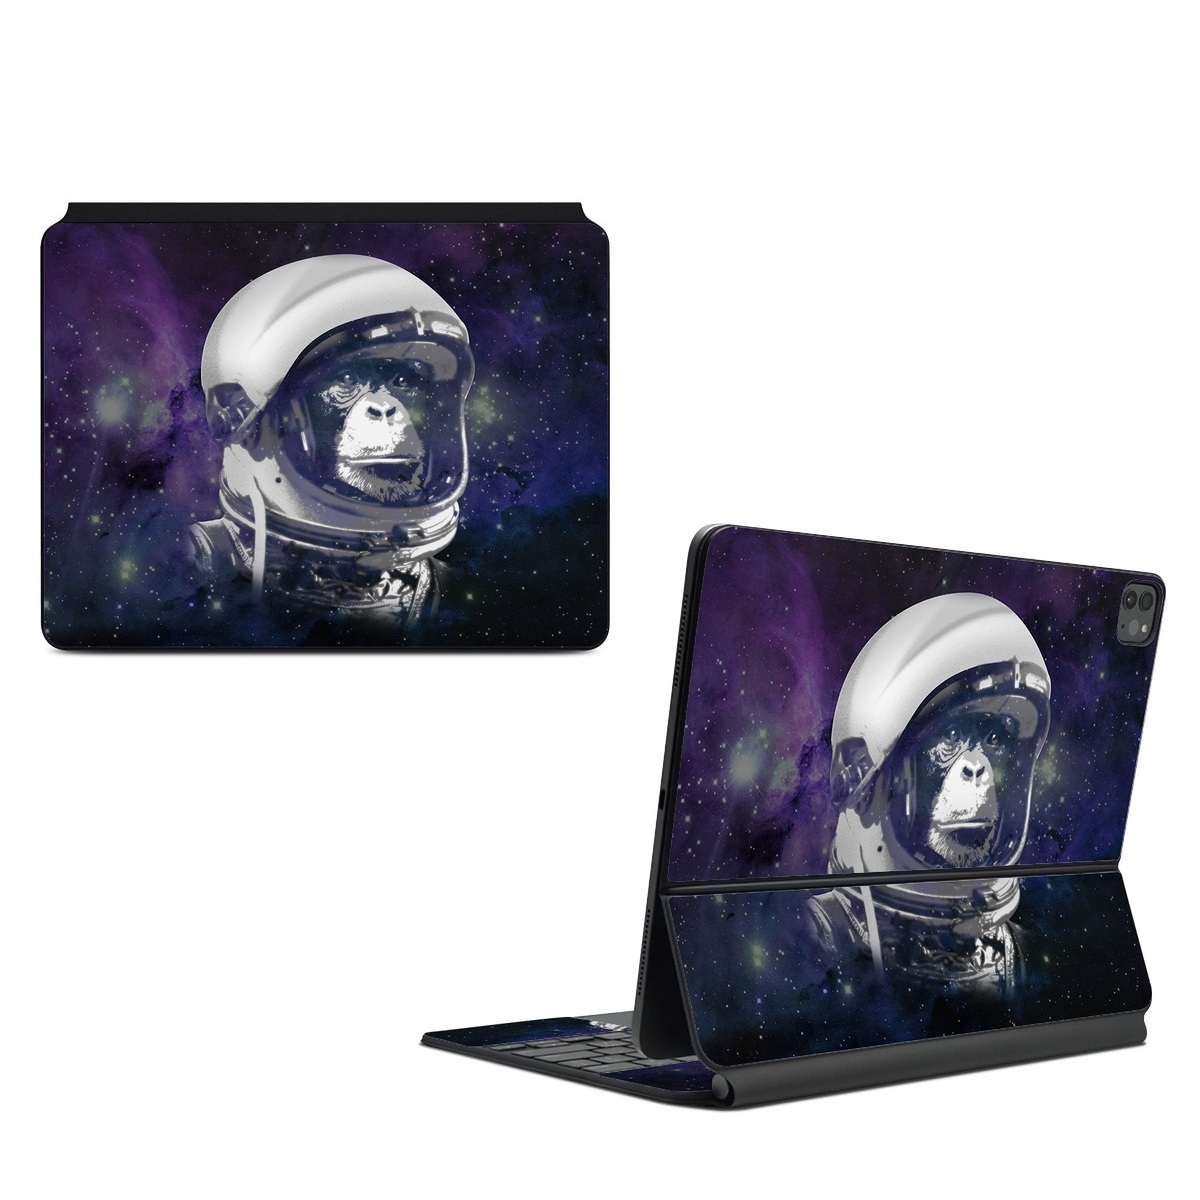 Magic Keyboard for iPad Series Skin design of Helmet, Astronaut, Personal protective equipment, Illustration, Space, Outer space, Headgear, Fictional character, Sports gear, Football gear, with black, gray, blue, white colors